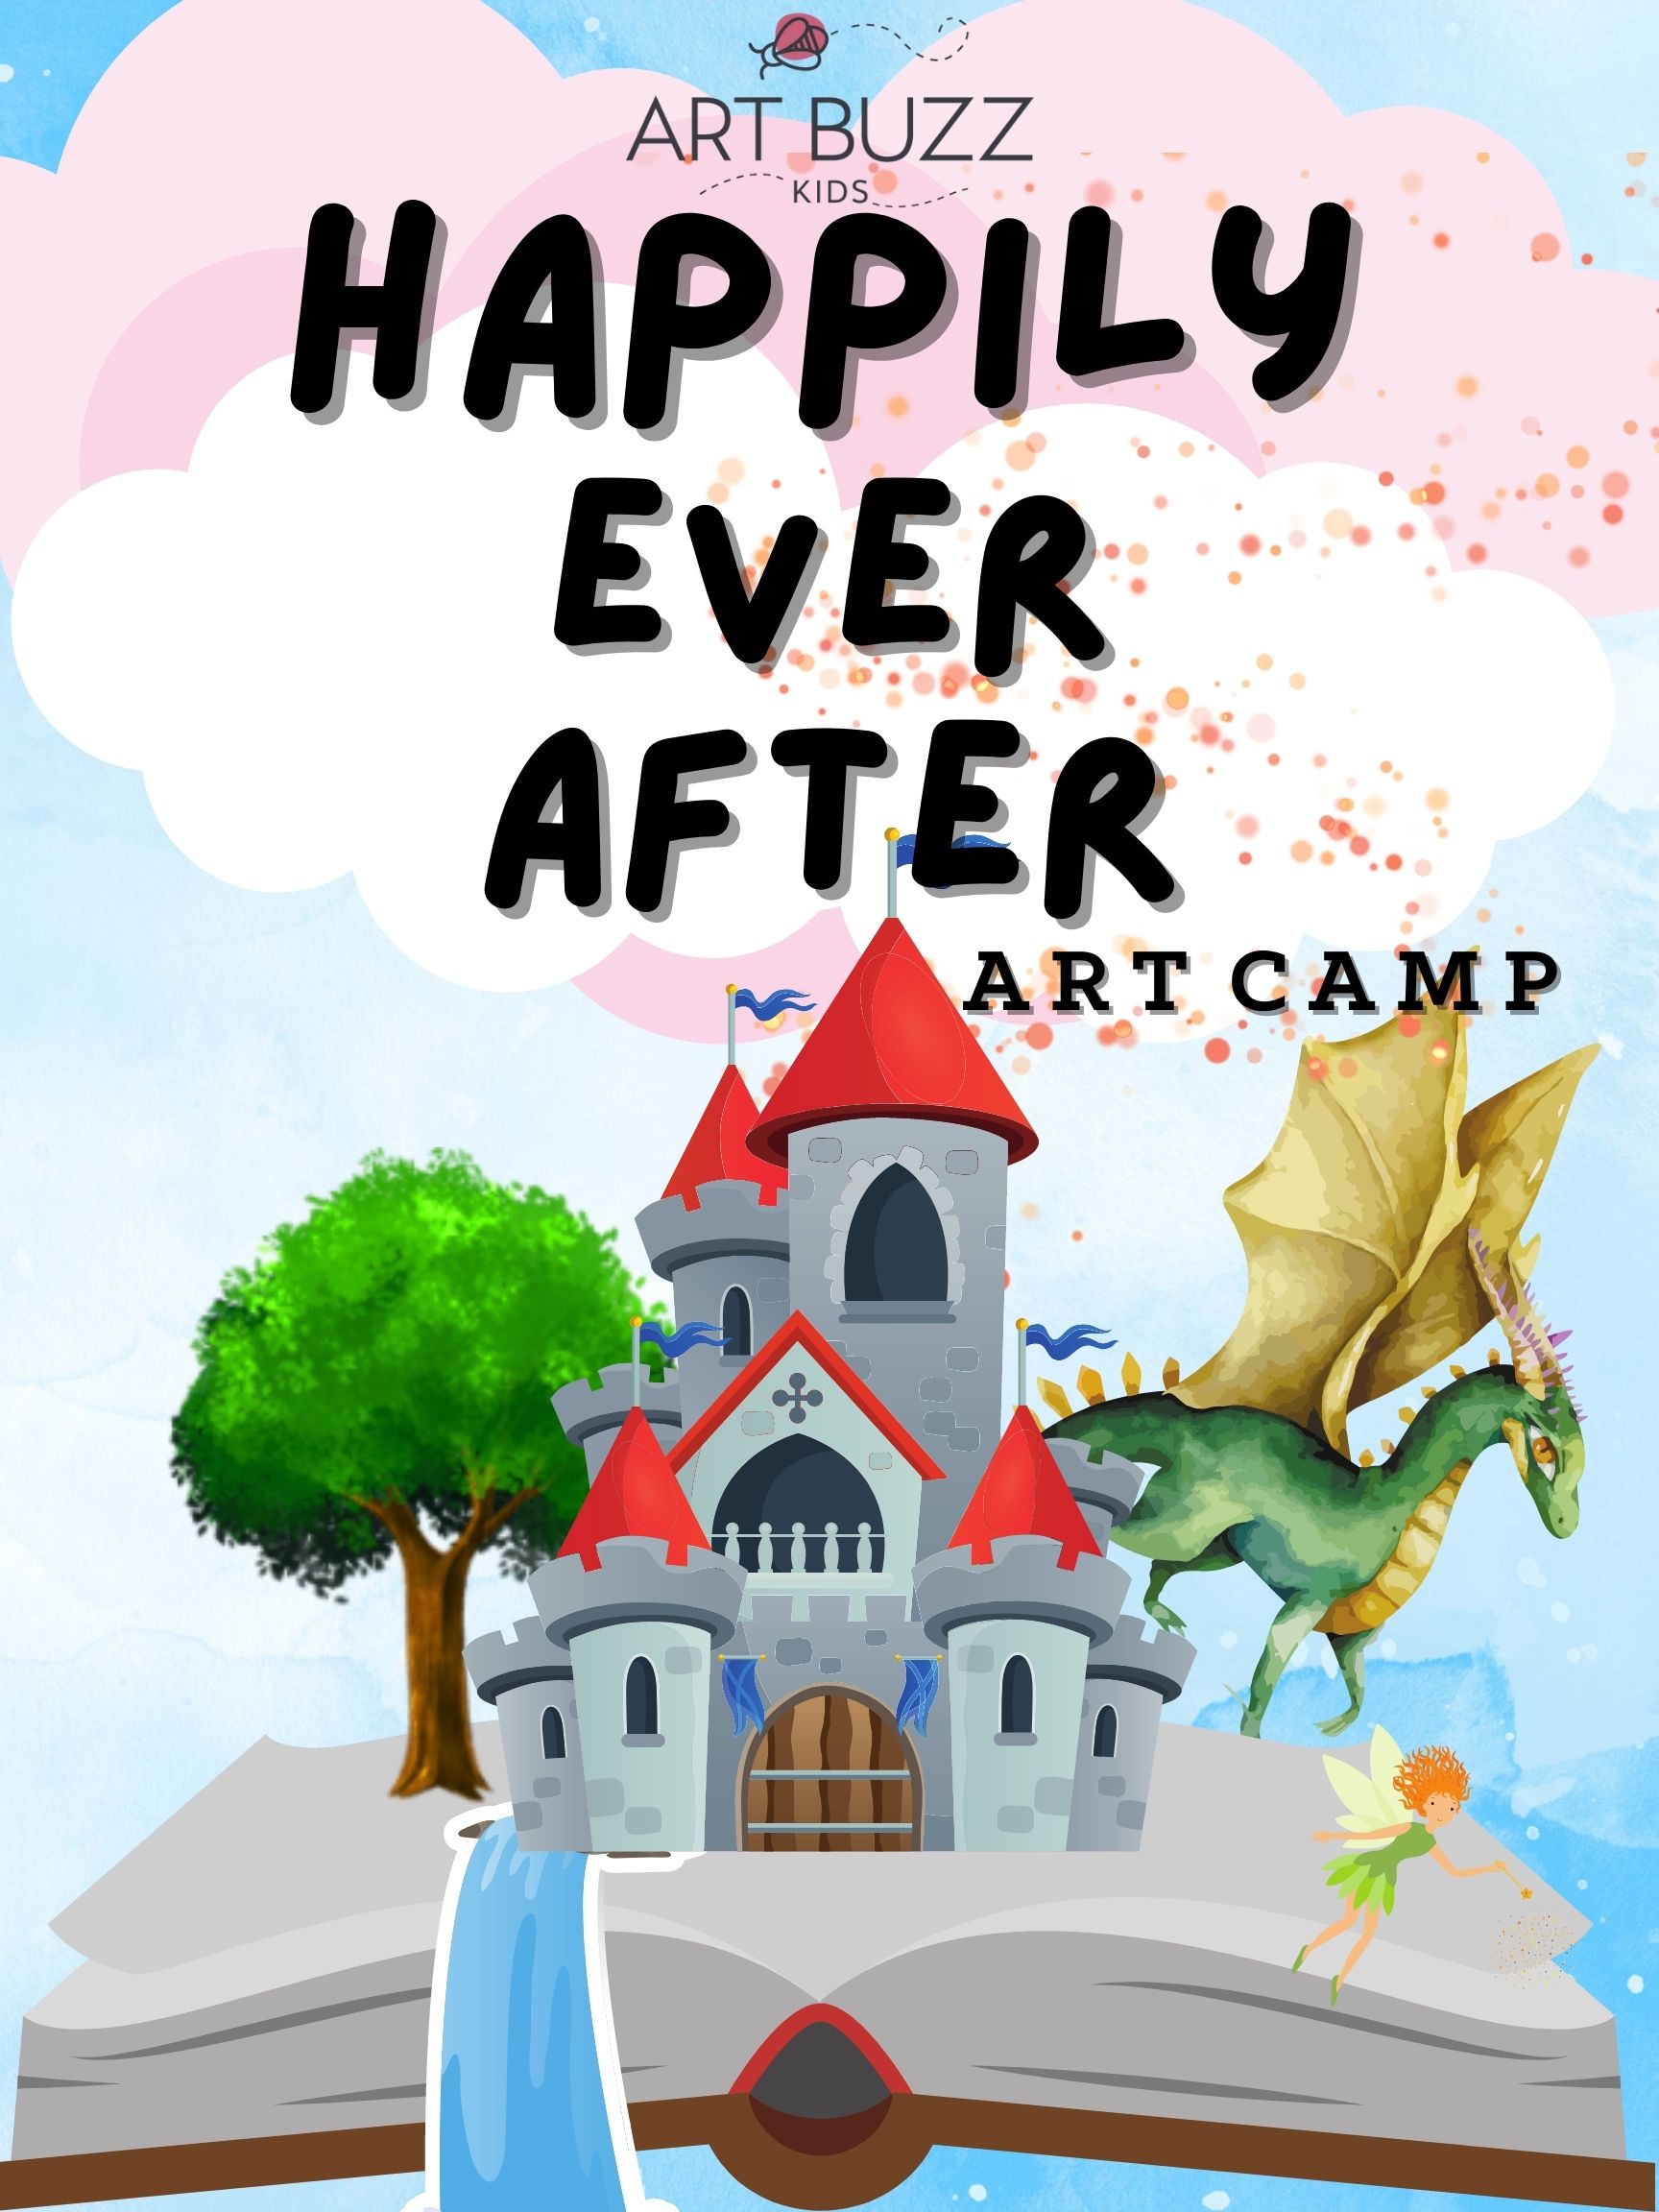 Happily Ever After Art Camp July 8th - 12th